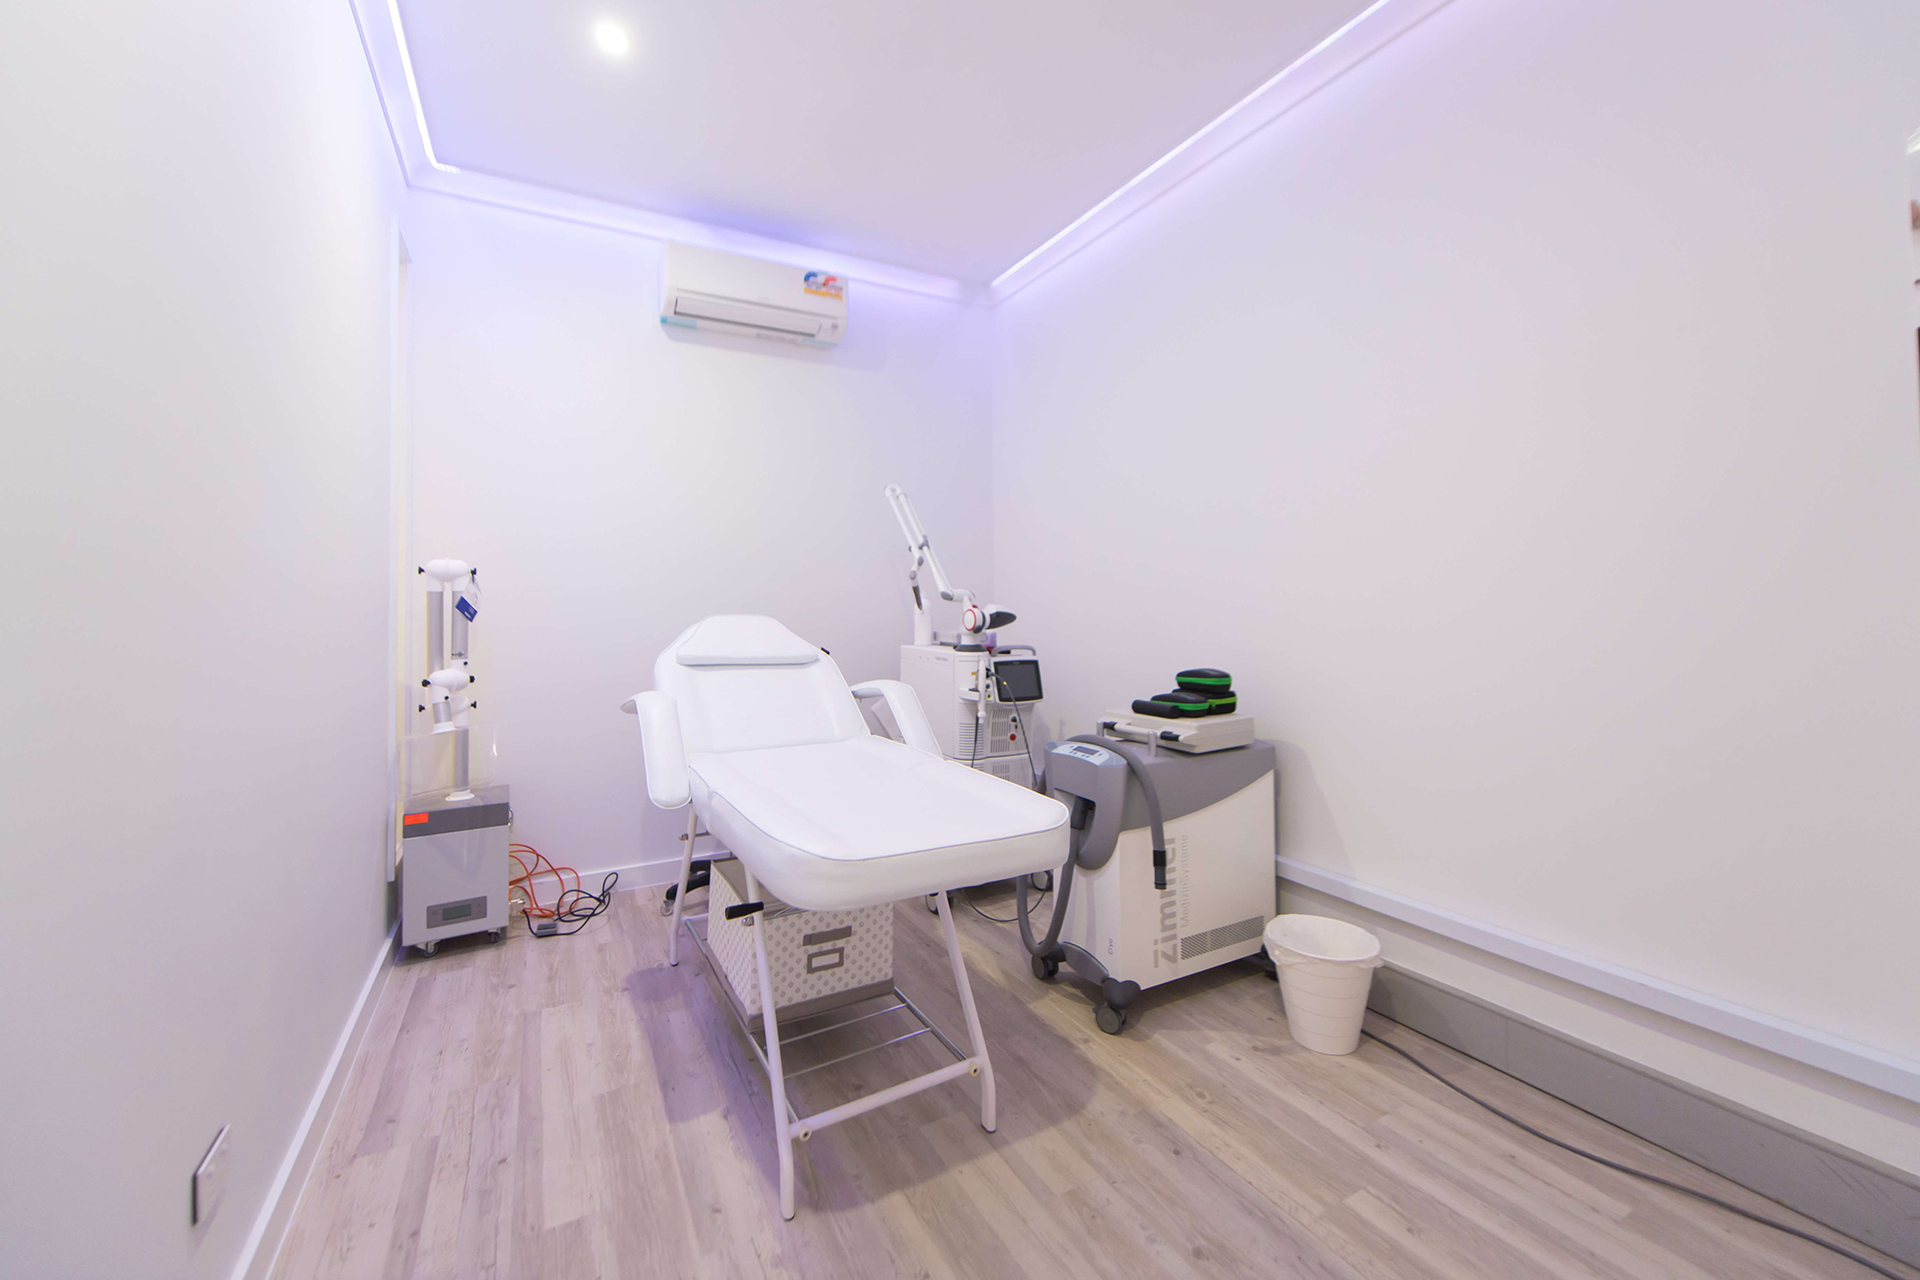 laser clinic